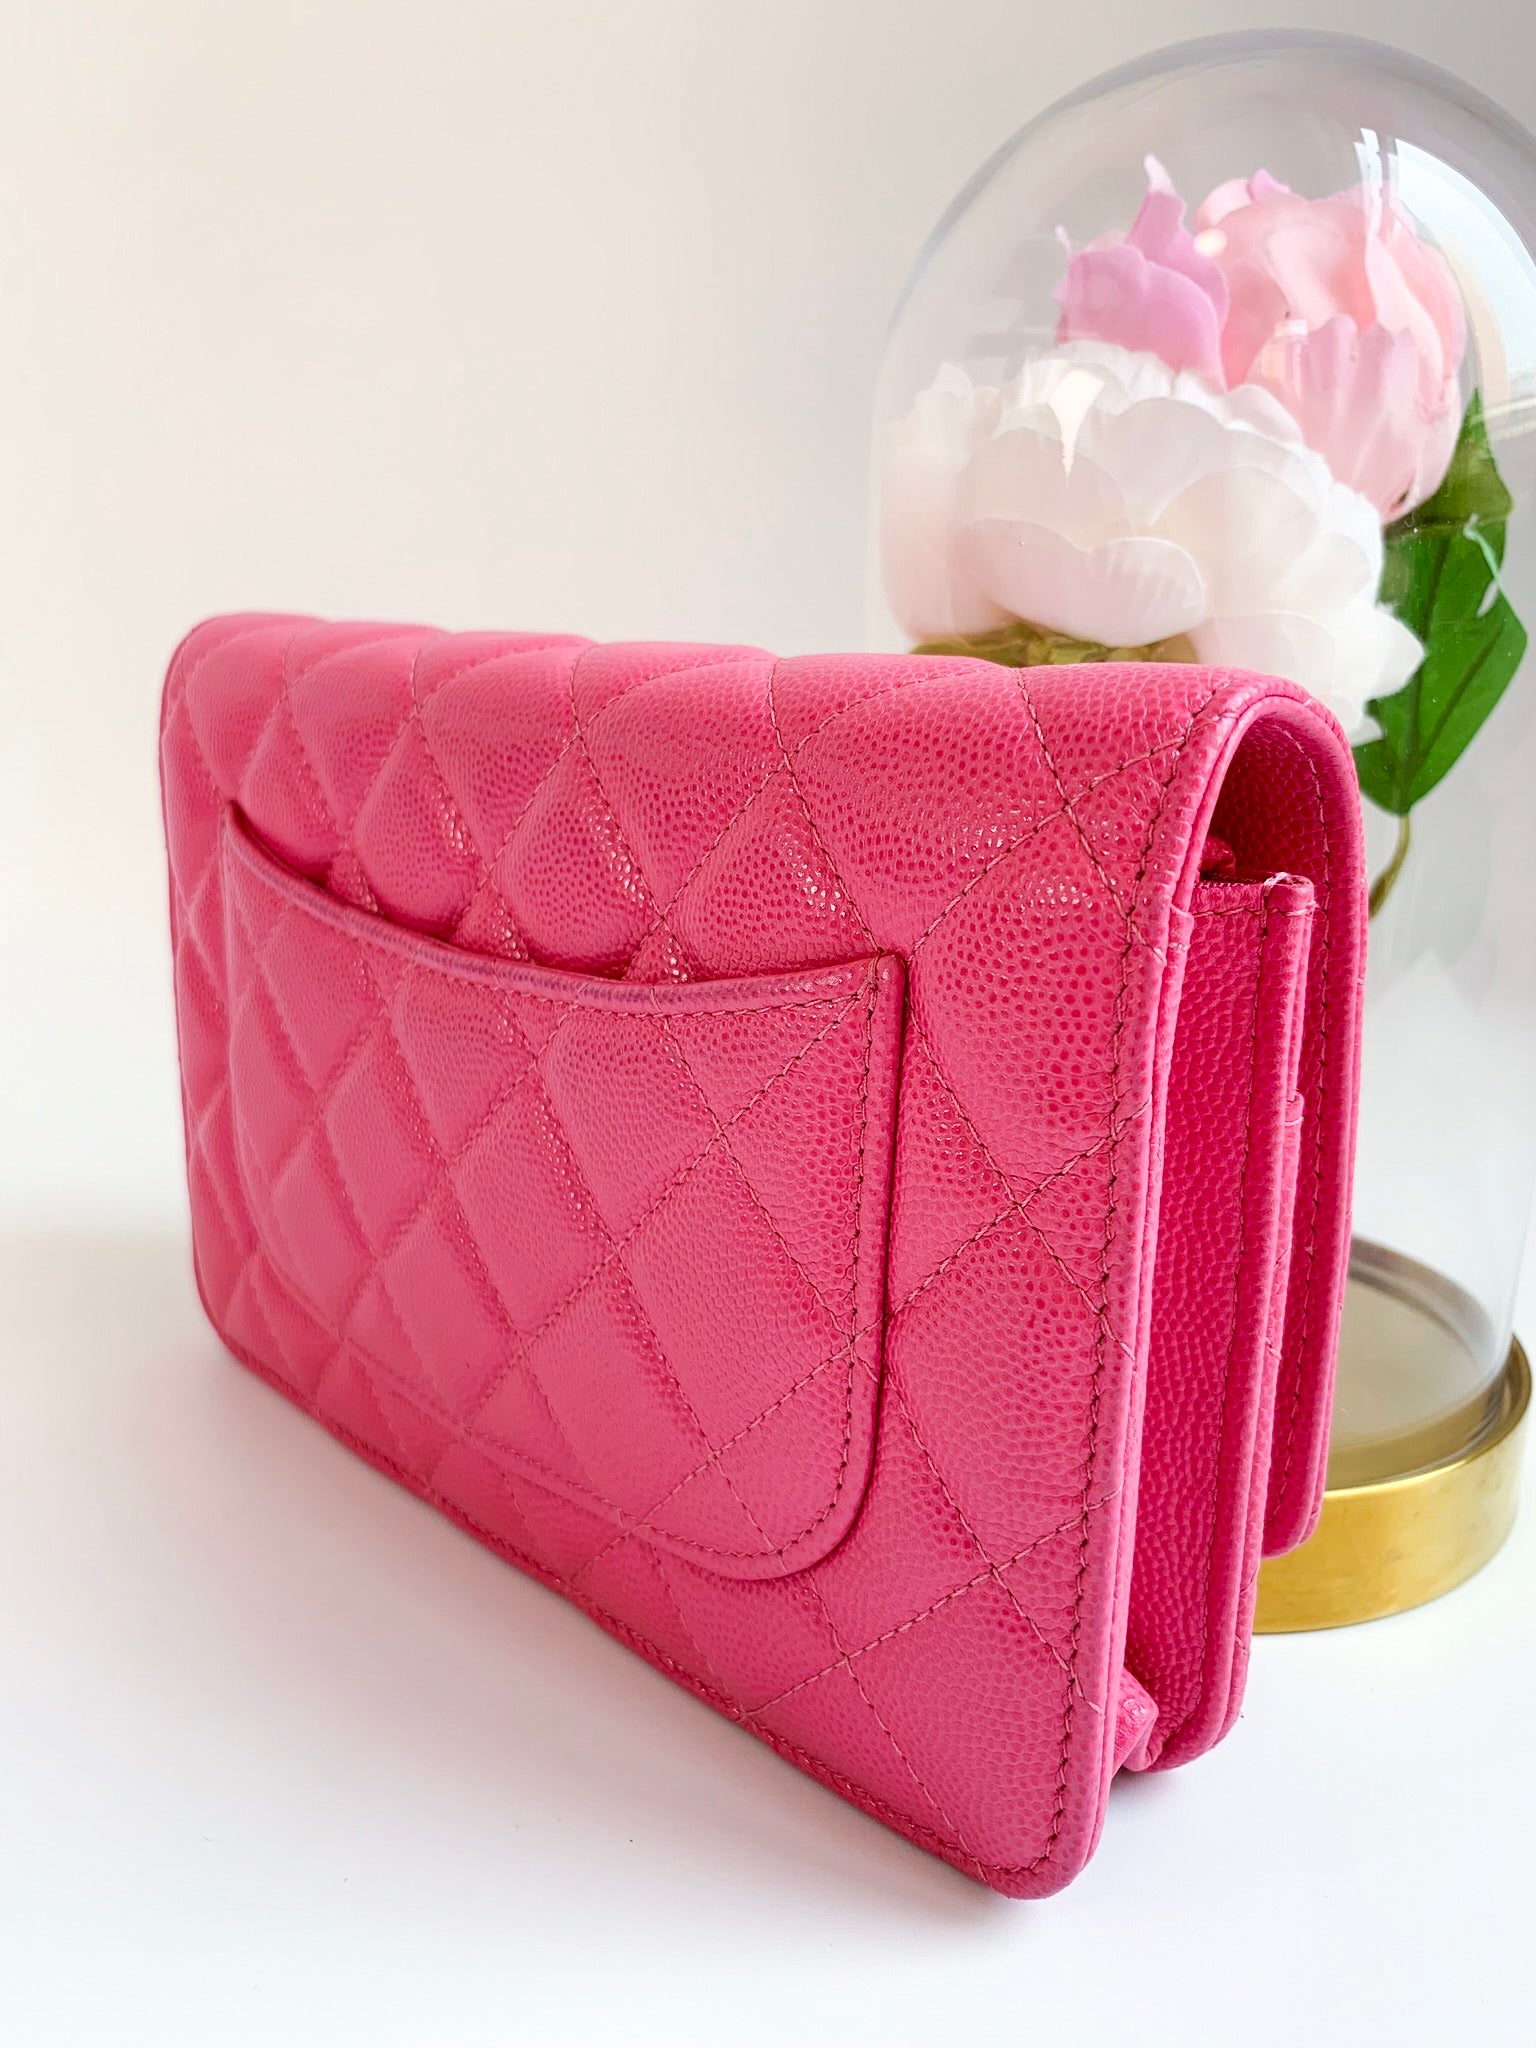 Chanel Timeless Wallet On Chain In Light Pink Caviar Leather With